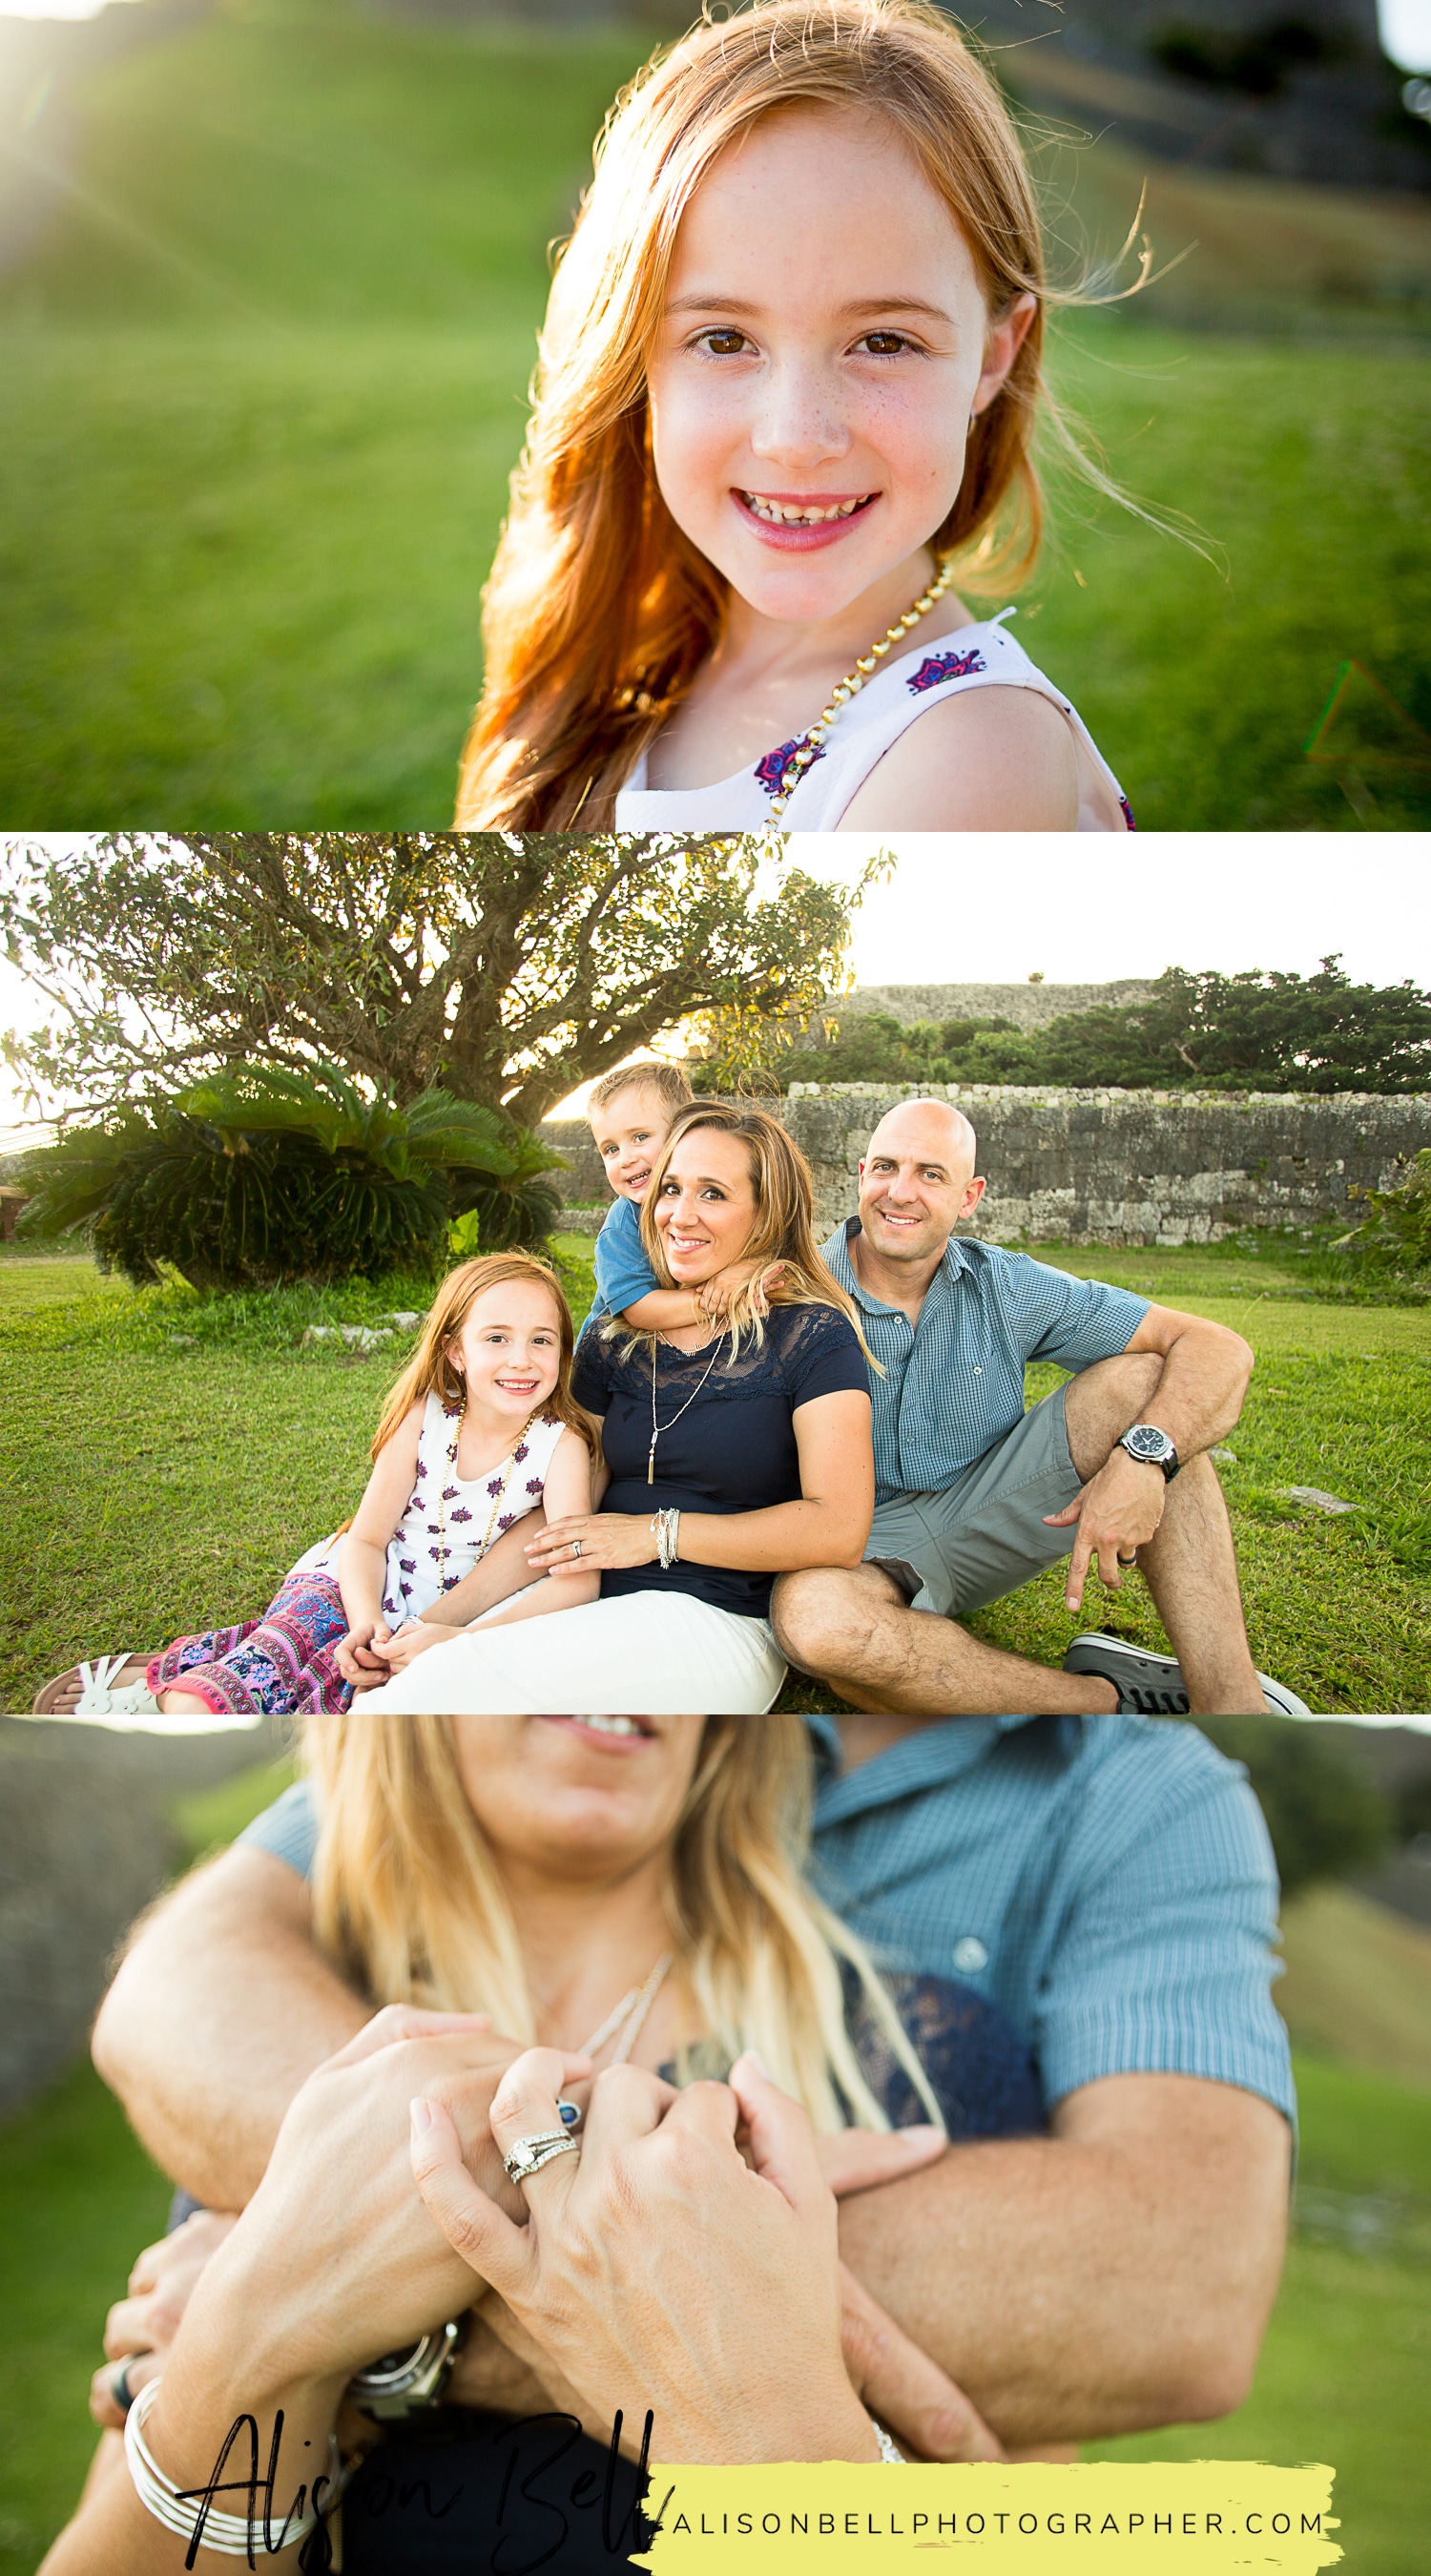 Pre-PCS family photos at Katsuren Castle in Okinawa Japan by Alison Bell, Photographer. #alisonbellphotog alisonbellphotographer.com High energy, fun family photography